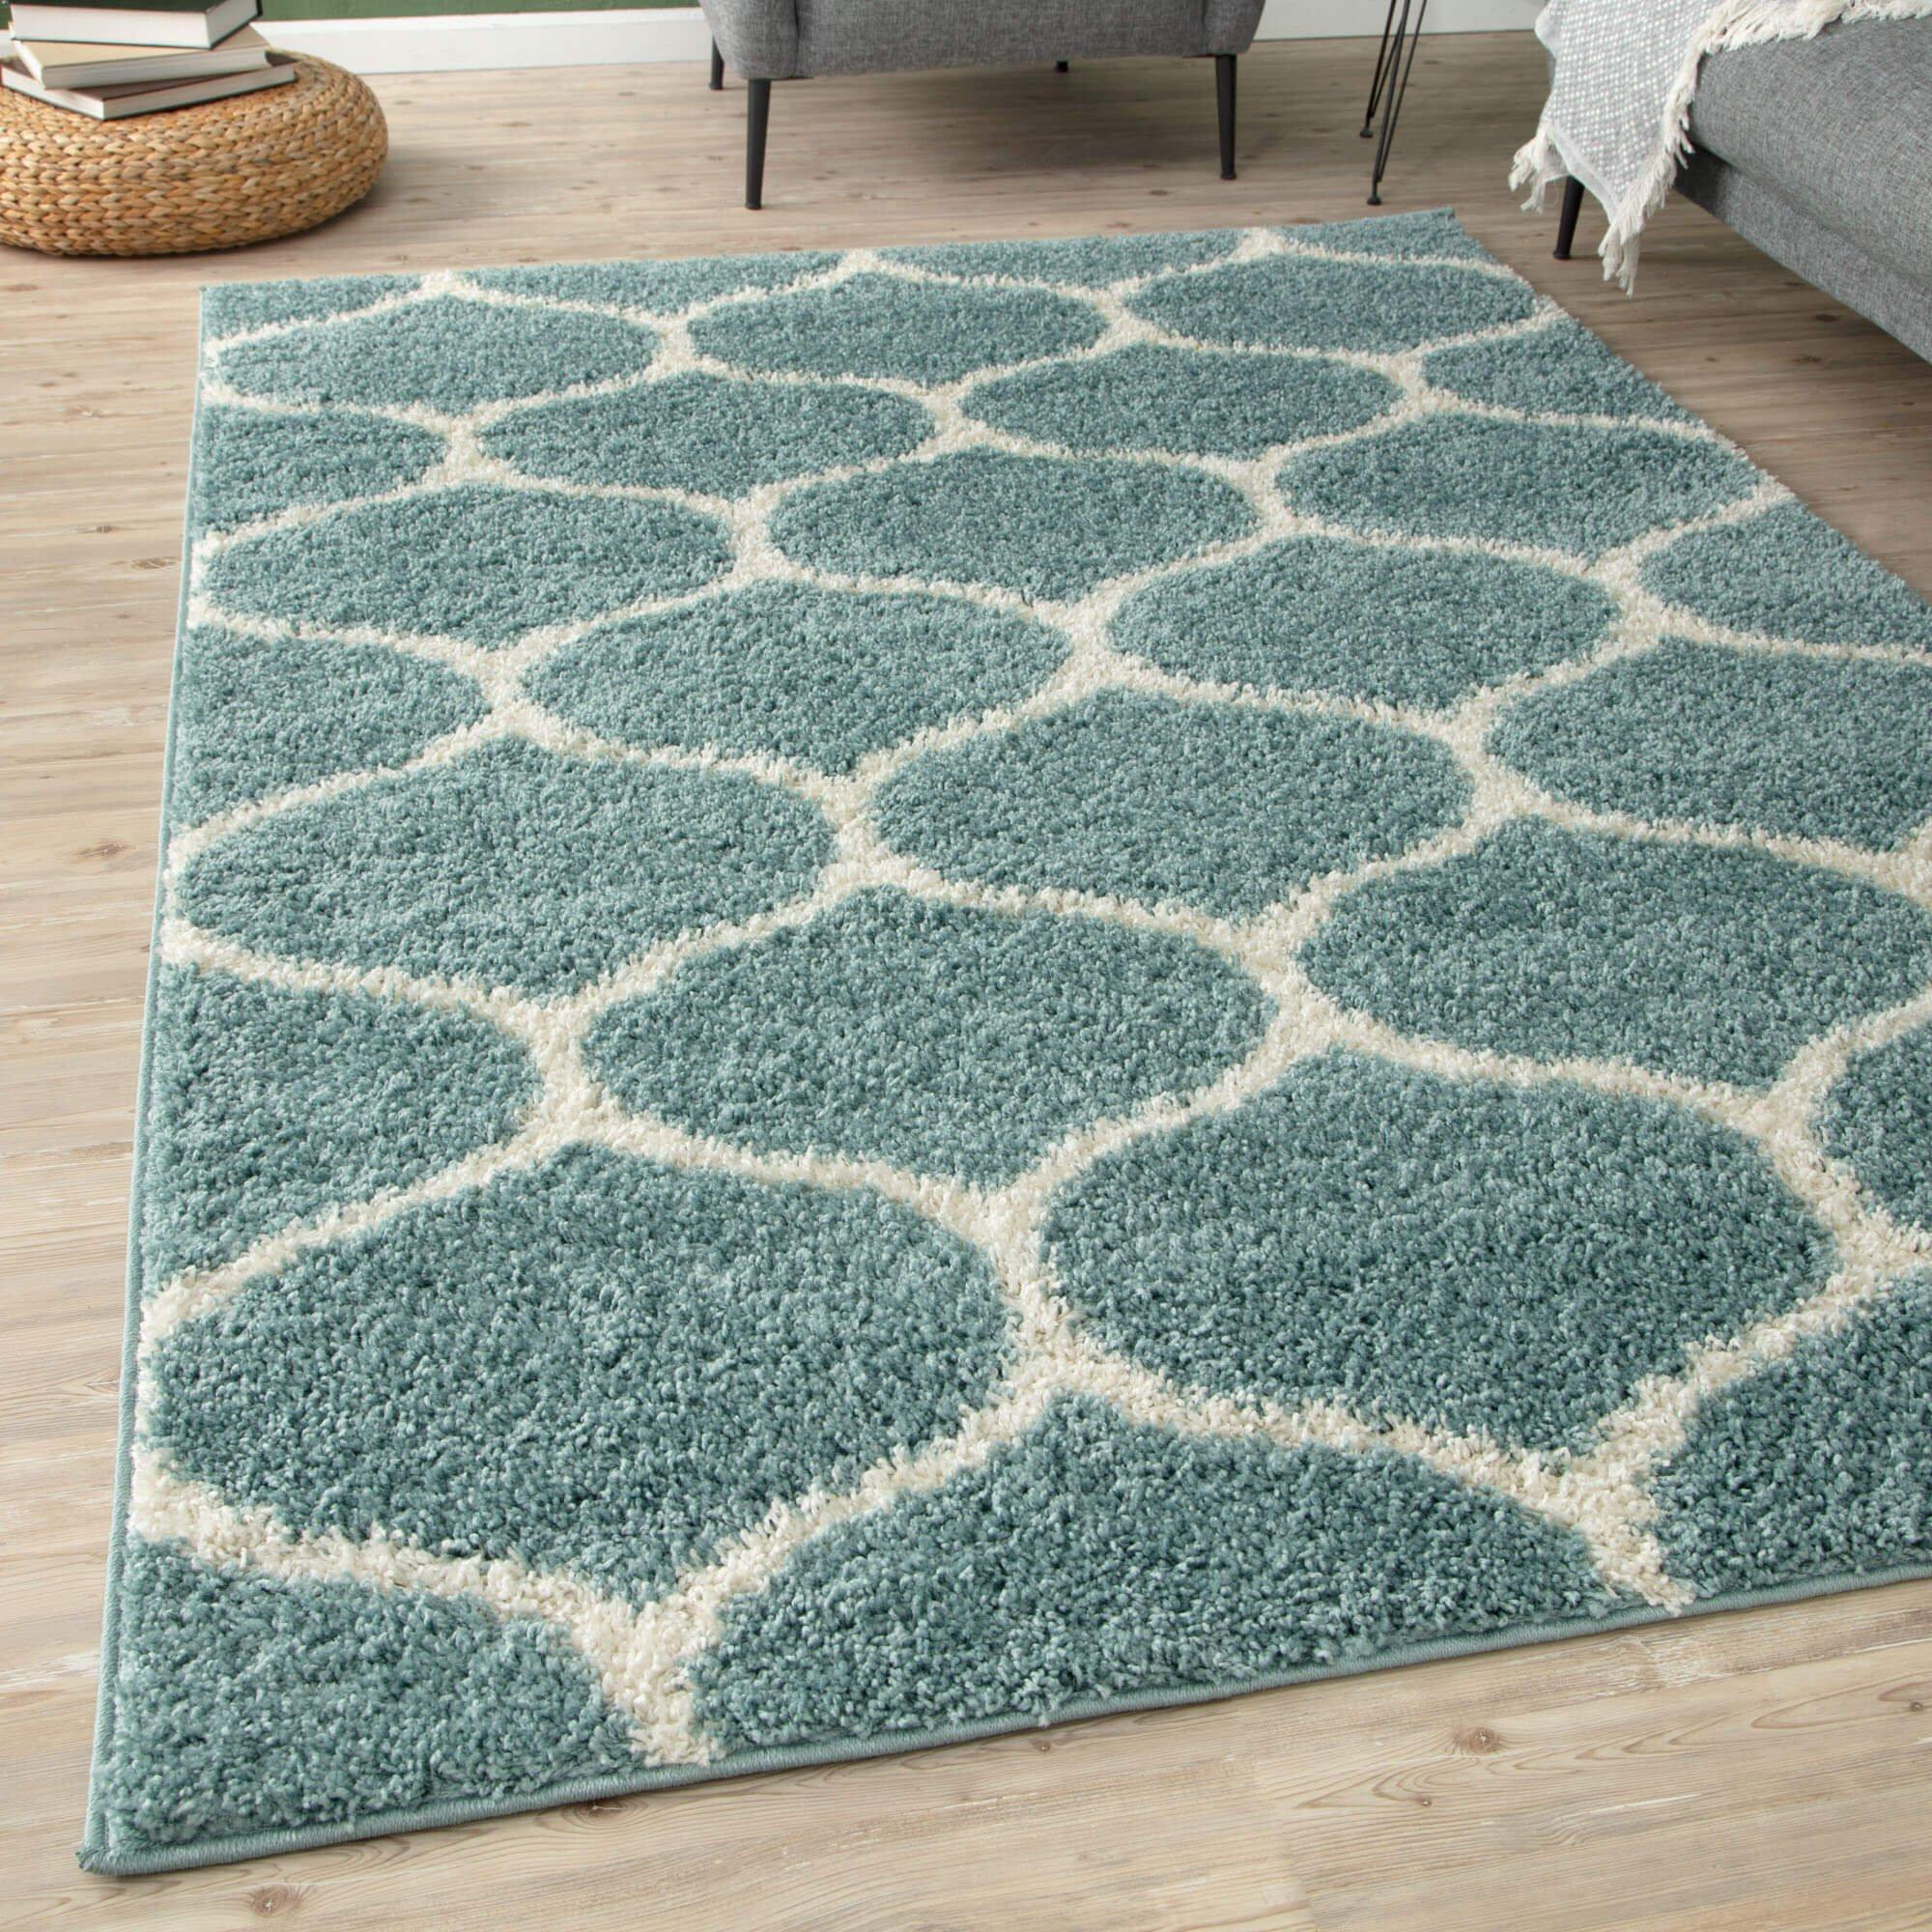 Myshaggy Collection Rugs Trellis Design in Duck Egg Blue - 384DB